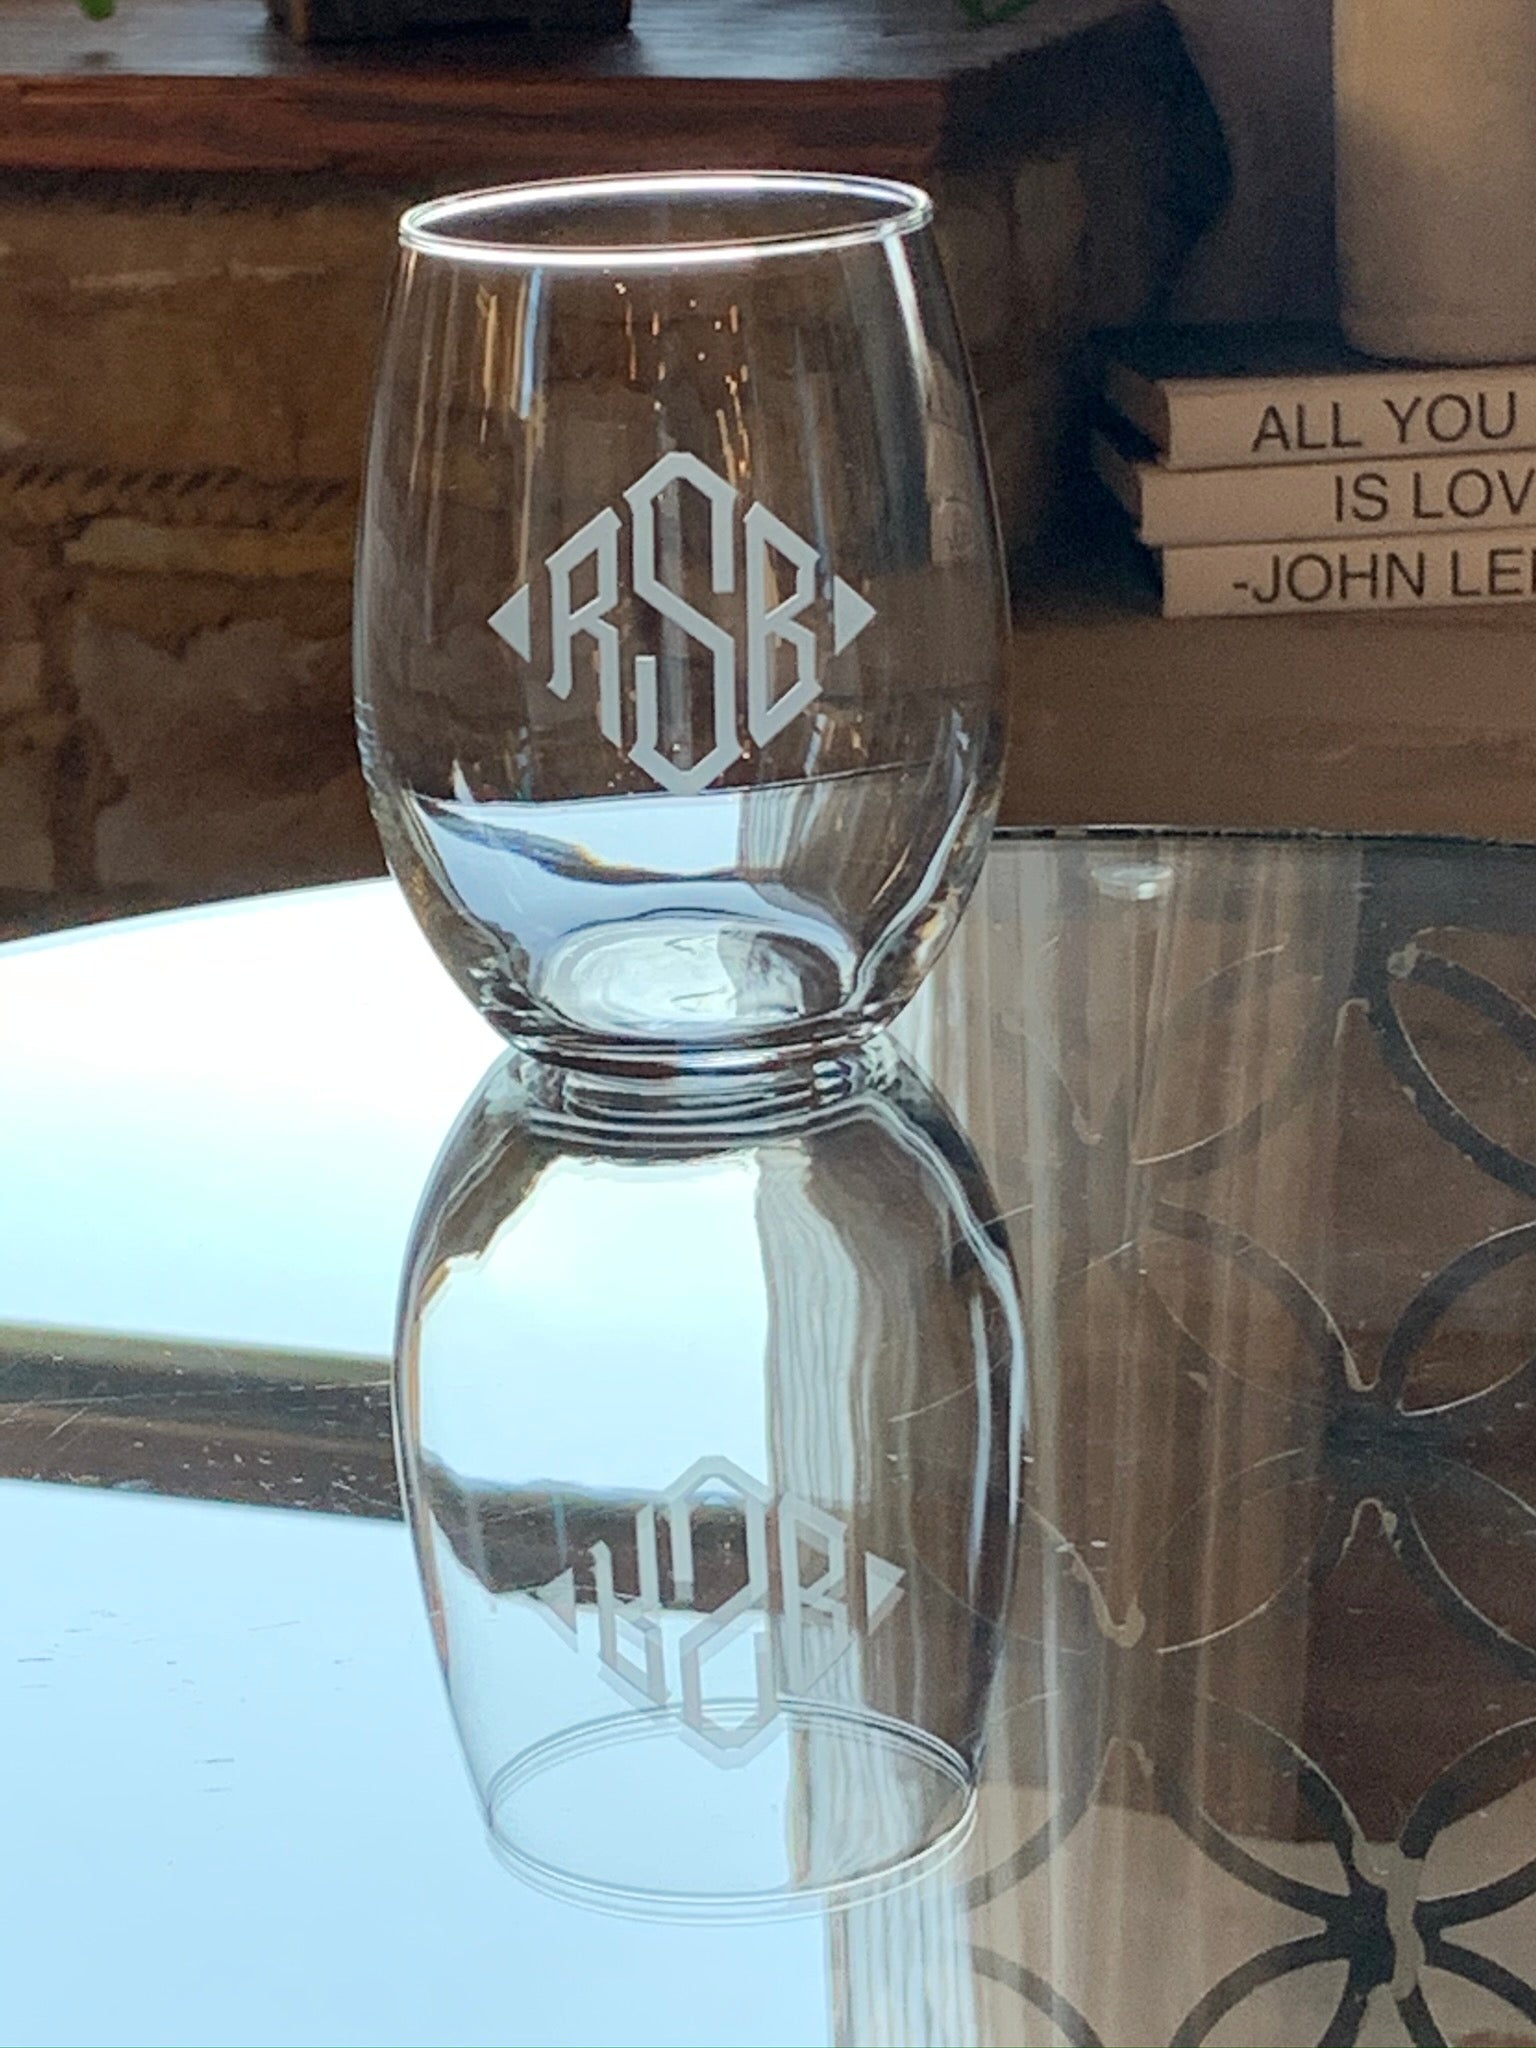 Engraved wine glass – 2 initials